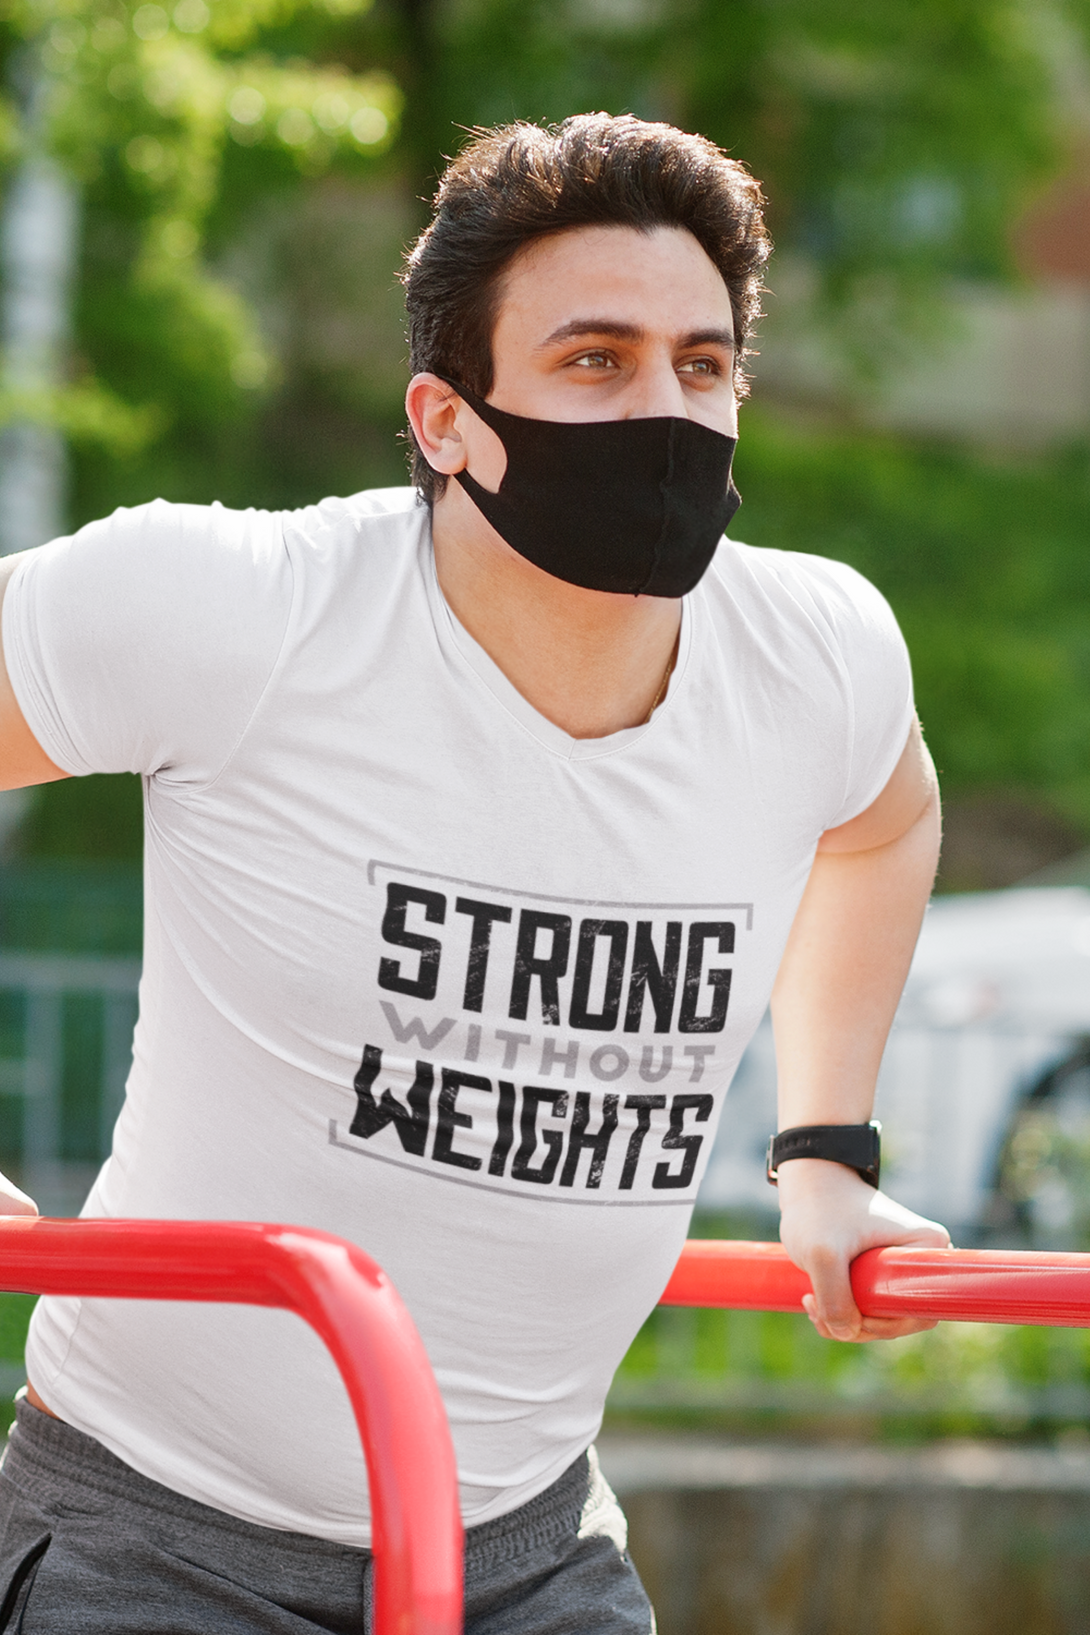 Strong Without Weights Printed T-Shirt For Men - WowWaves - 4